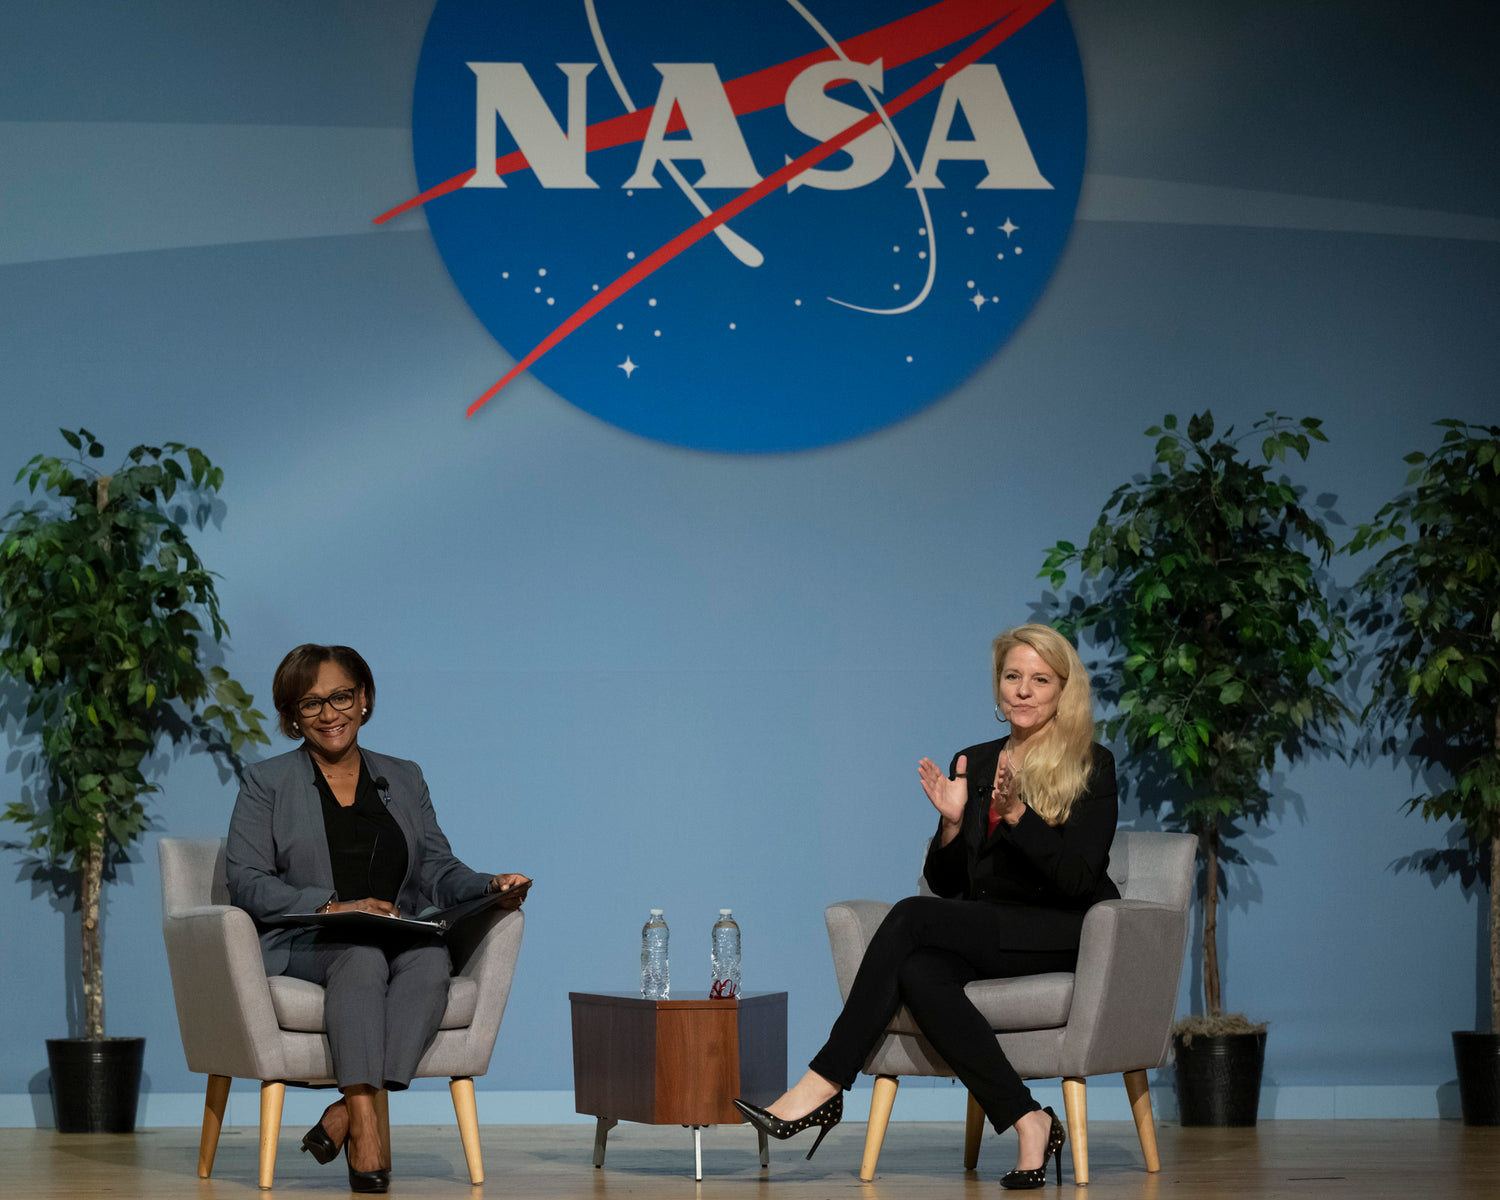 NASA official meets with SpaceX President Gwynne Shotwell to discuss partnership